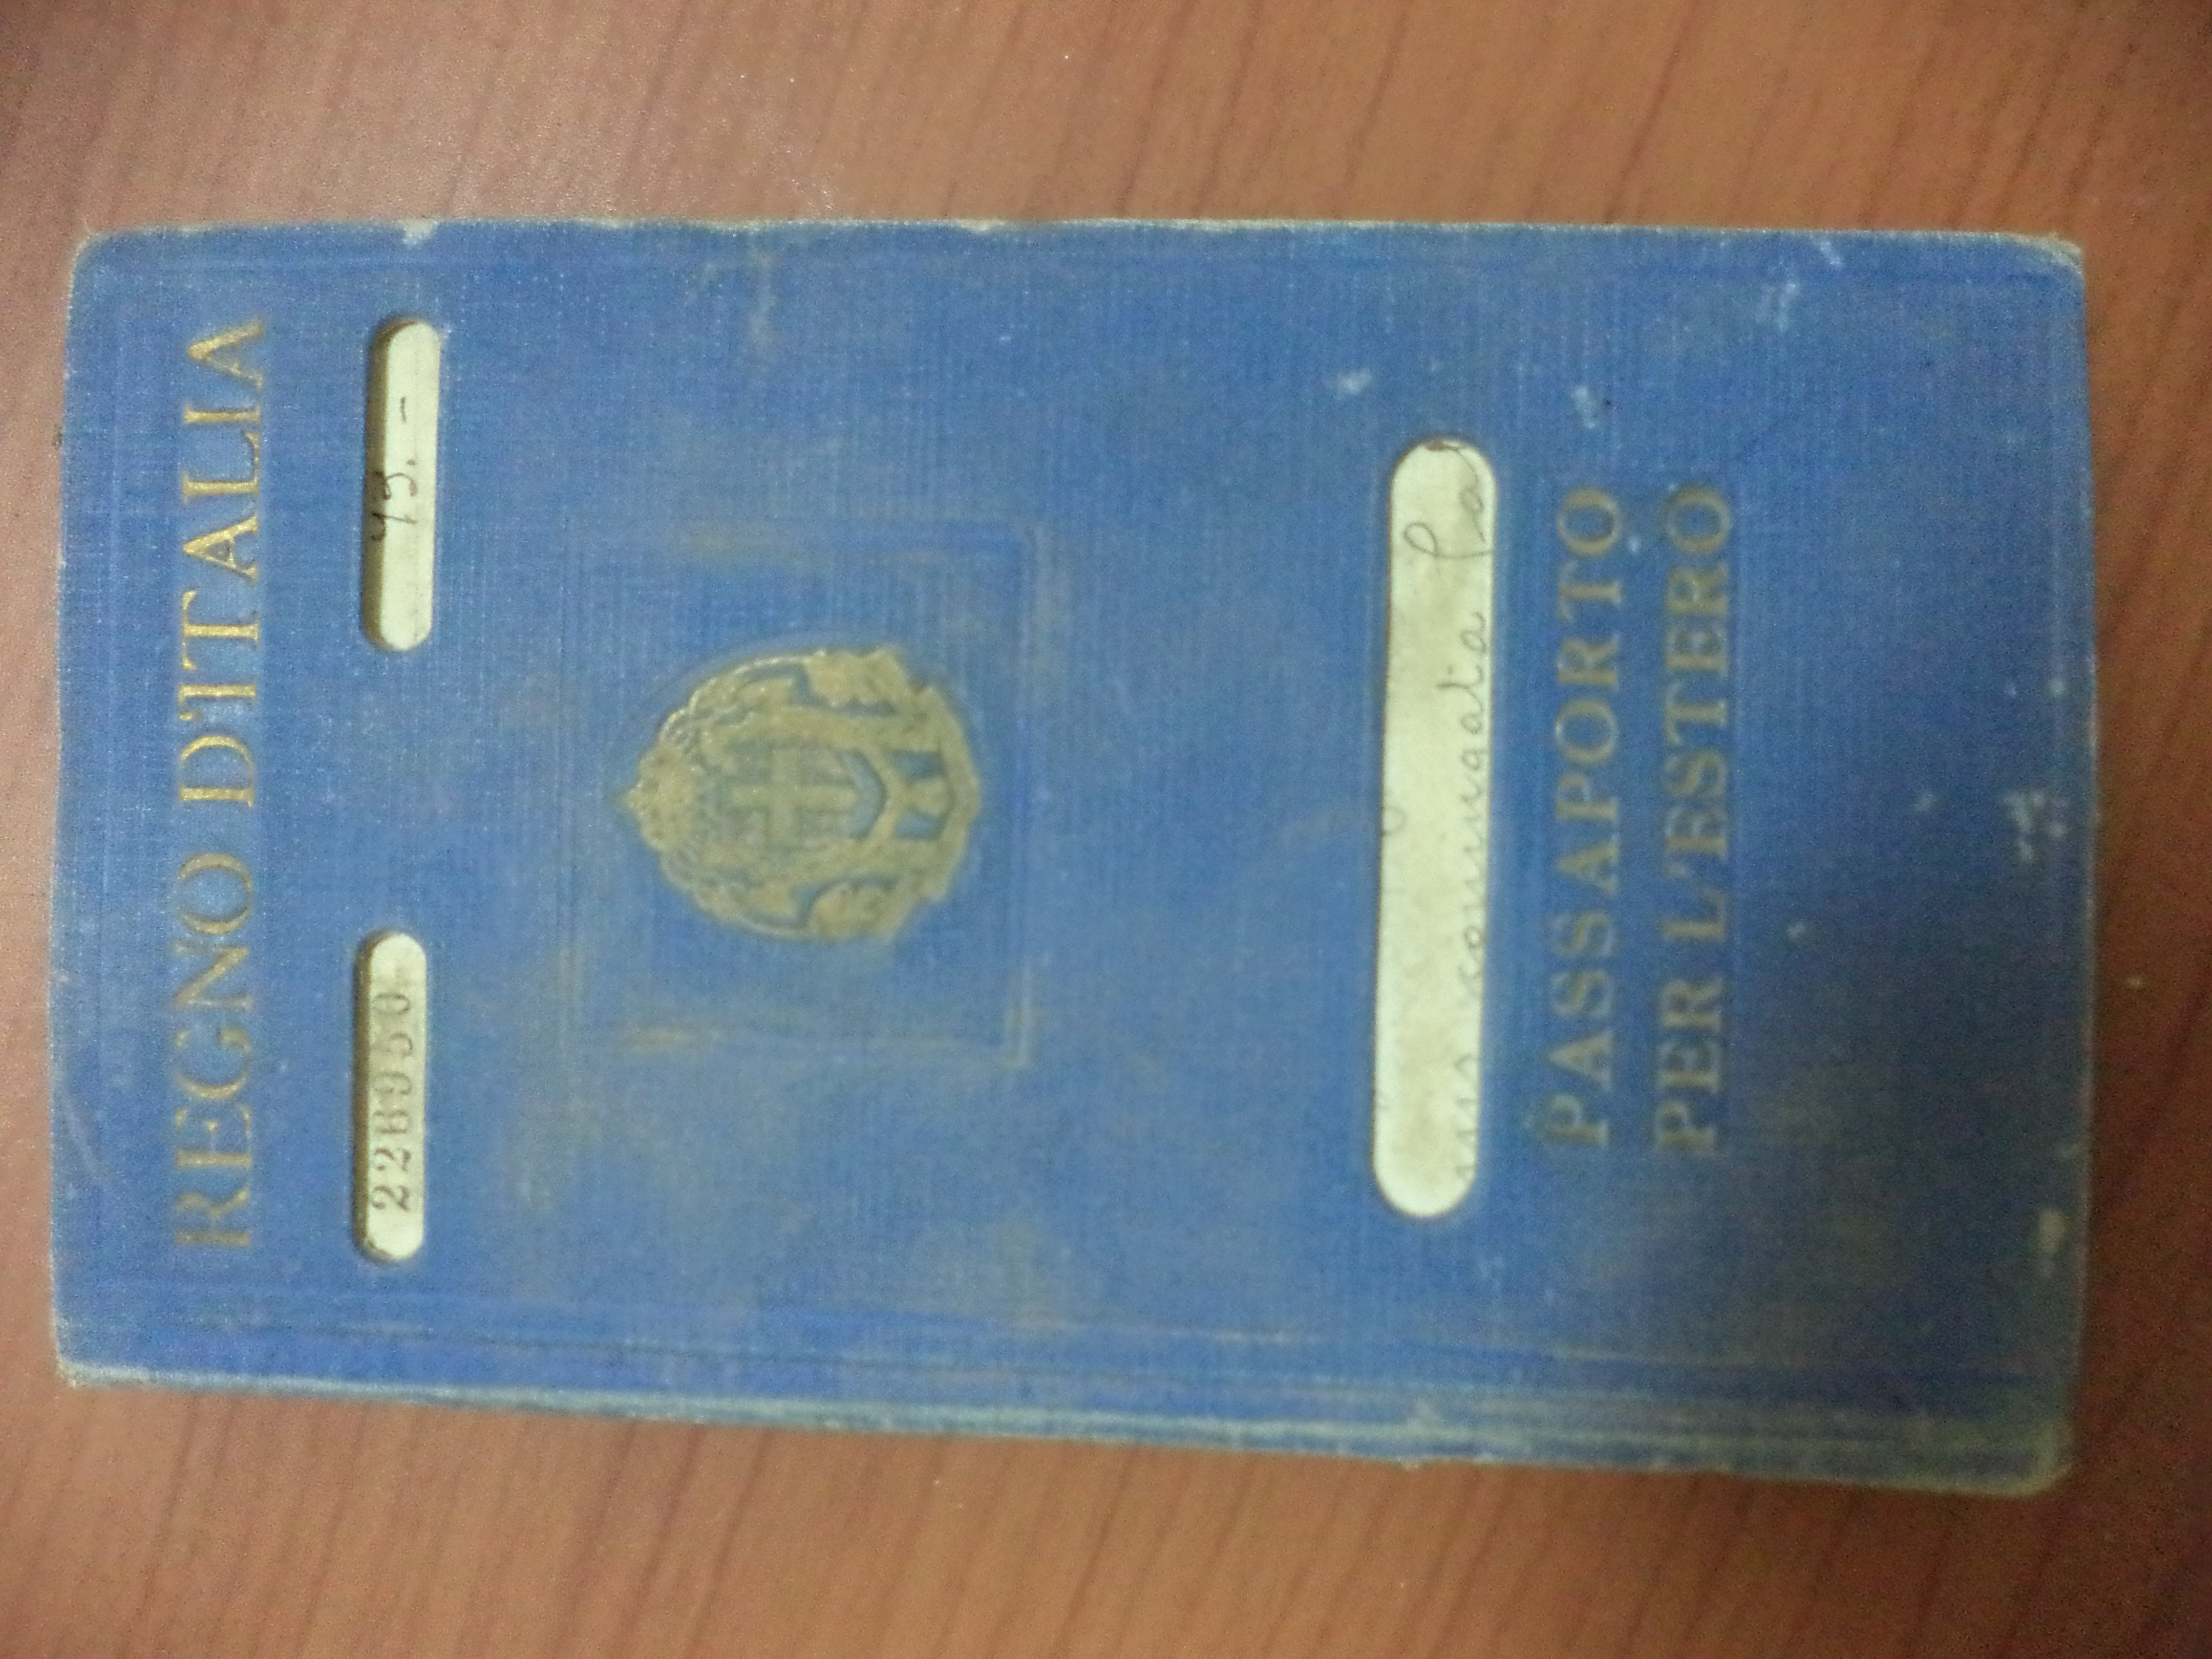 A blue passport on a table